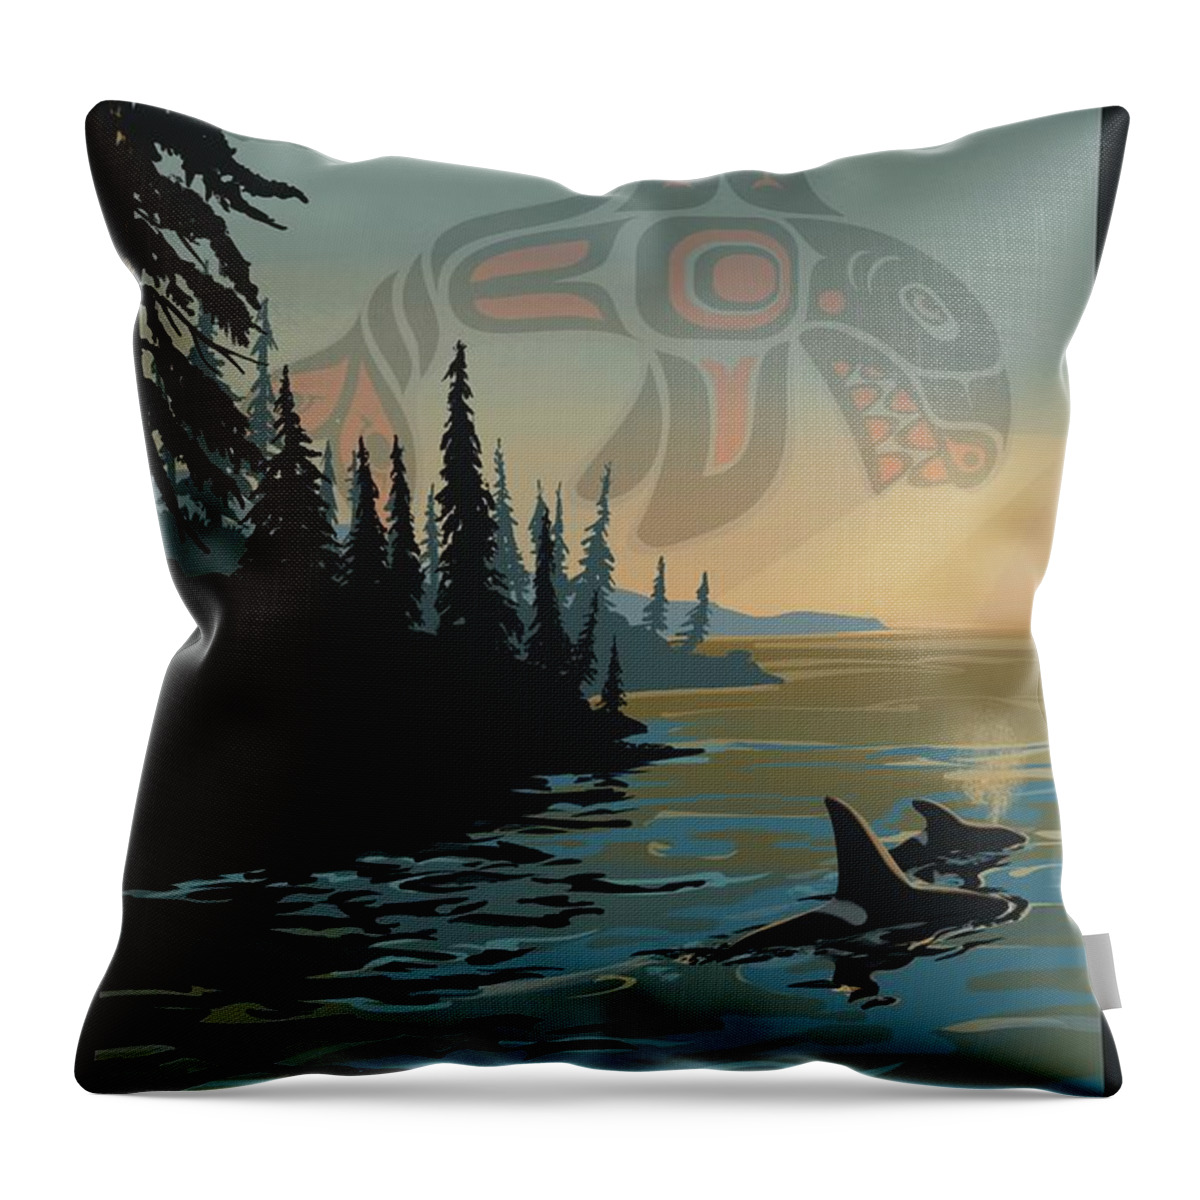 Travel Poster Throw Pillow featuring the painting Retro Killer Whale BC Travel Poster by Sassan Filsoof